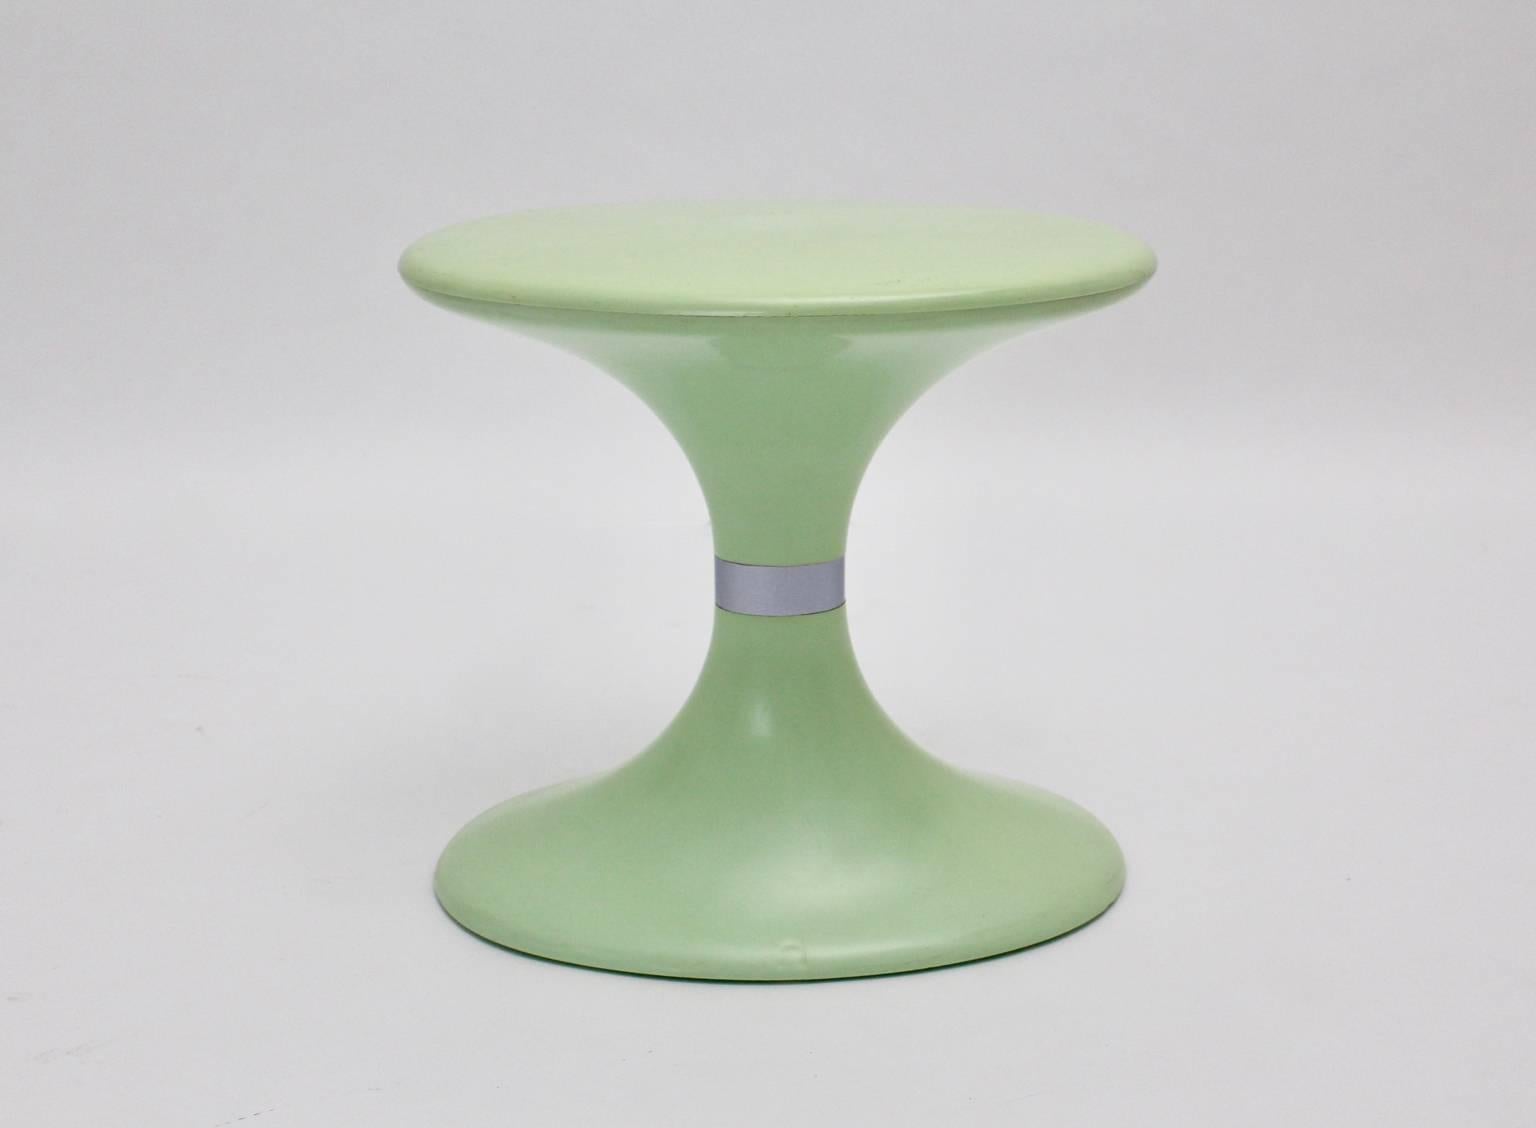 A rare pistachio green colored plastic stool or ottoman designed by Carrara & Matta model Senna from the 1970s.
The color is pistachio green with a metal ribbon in the middle of the stool.
Stamped inside with Carrara & Matta, Made in Italy
The